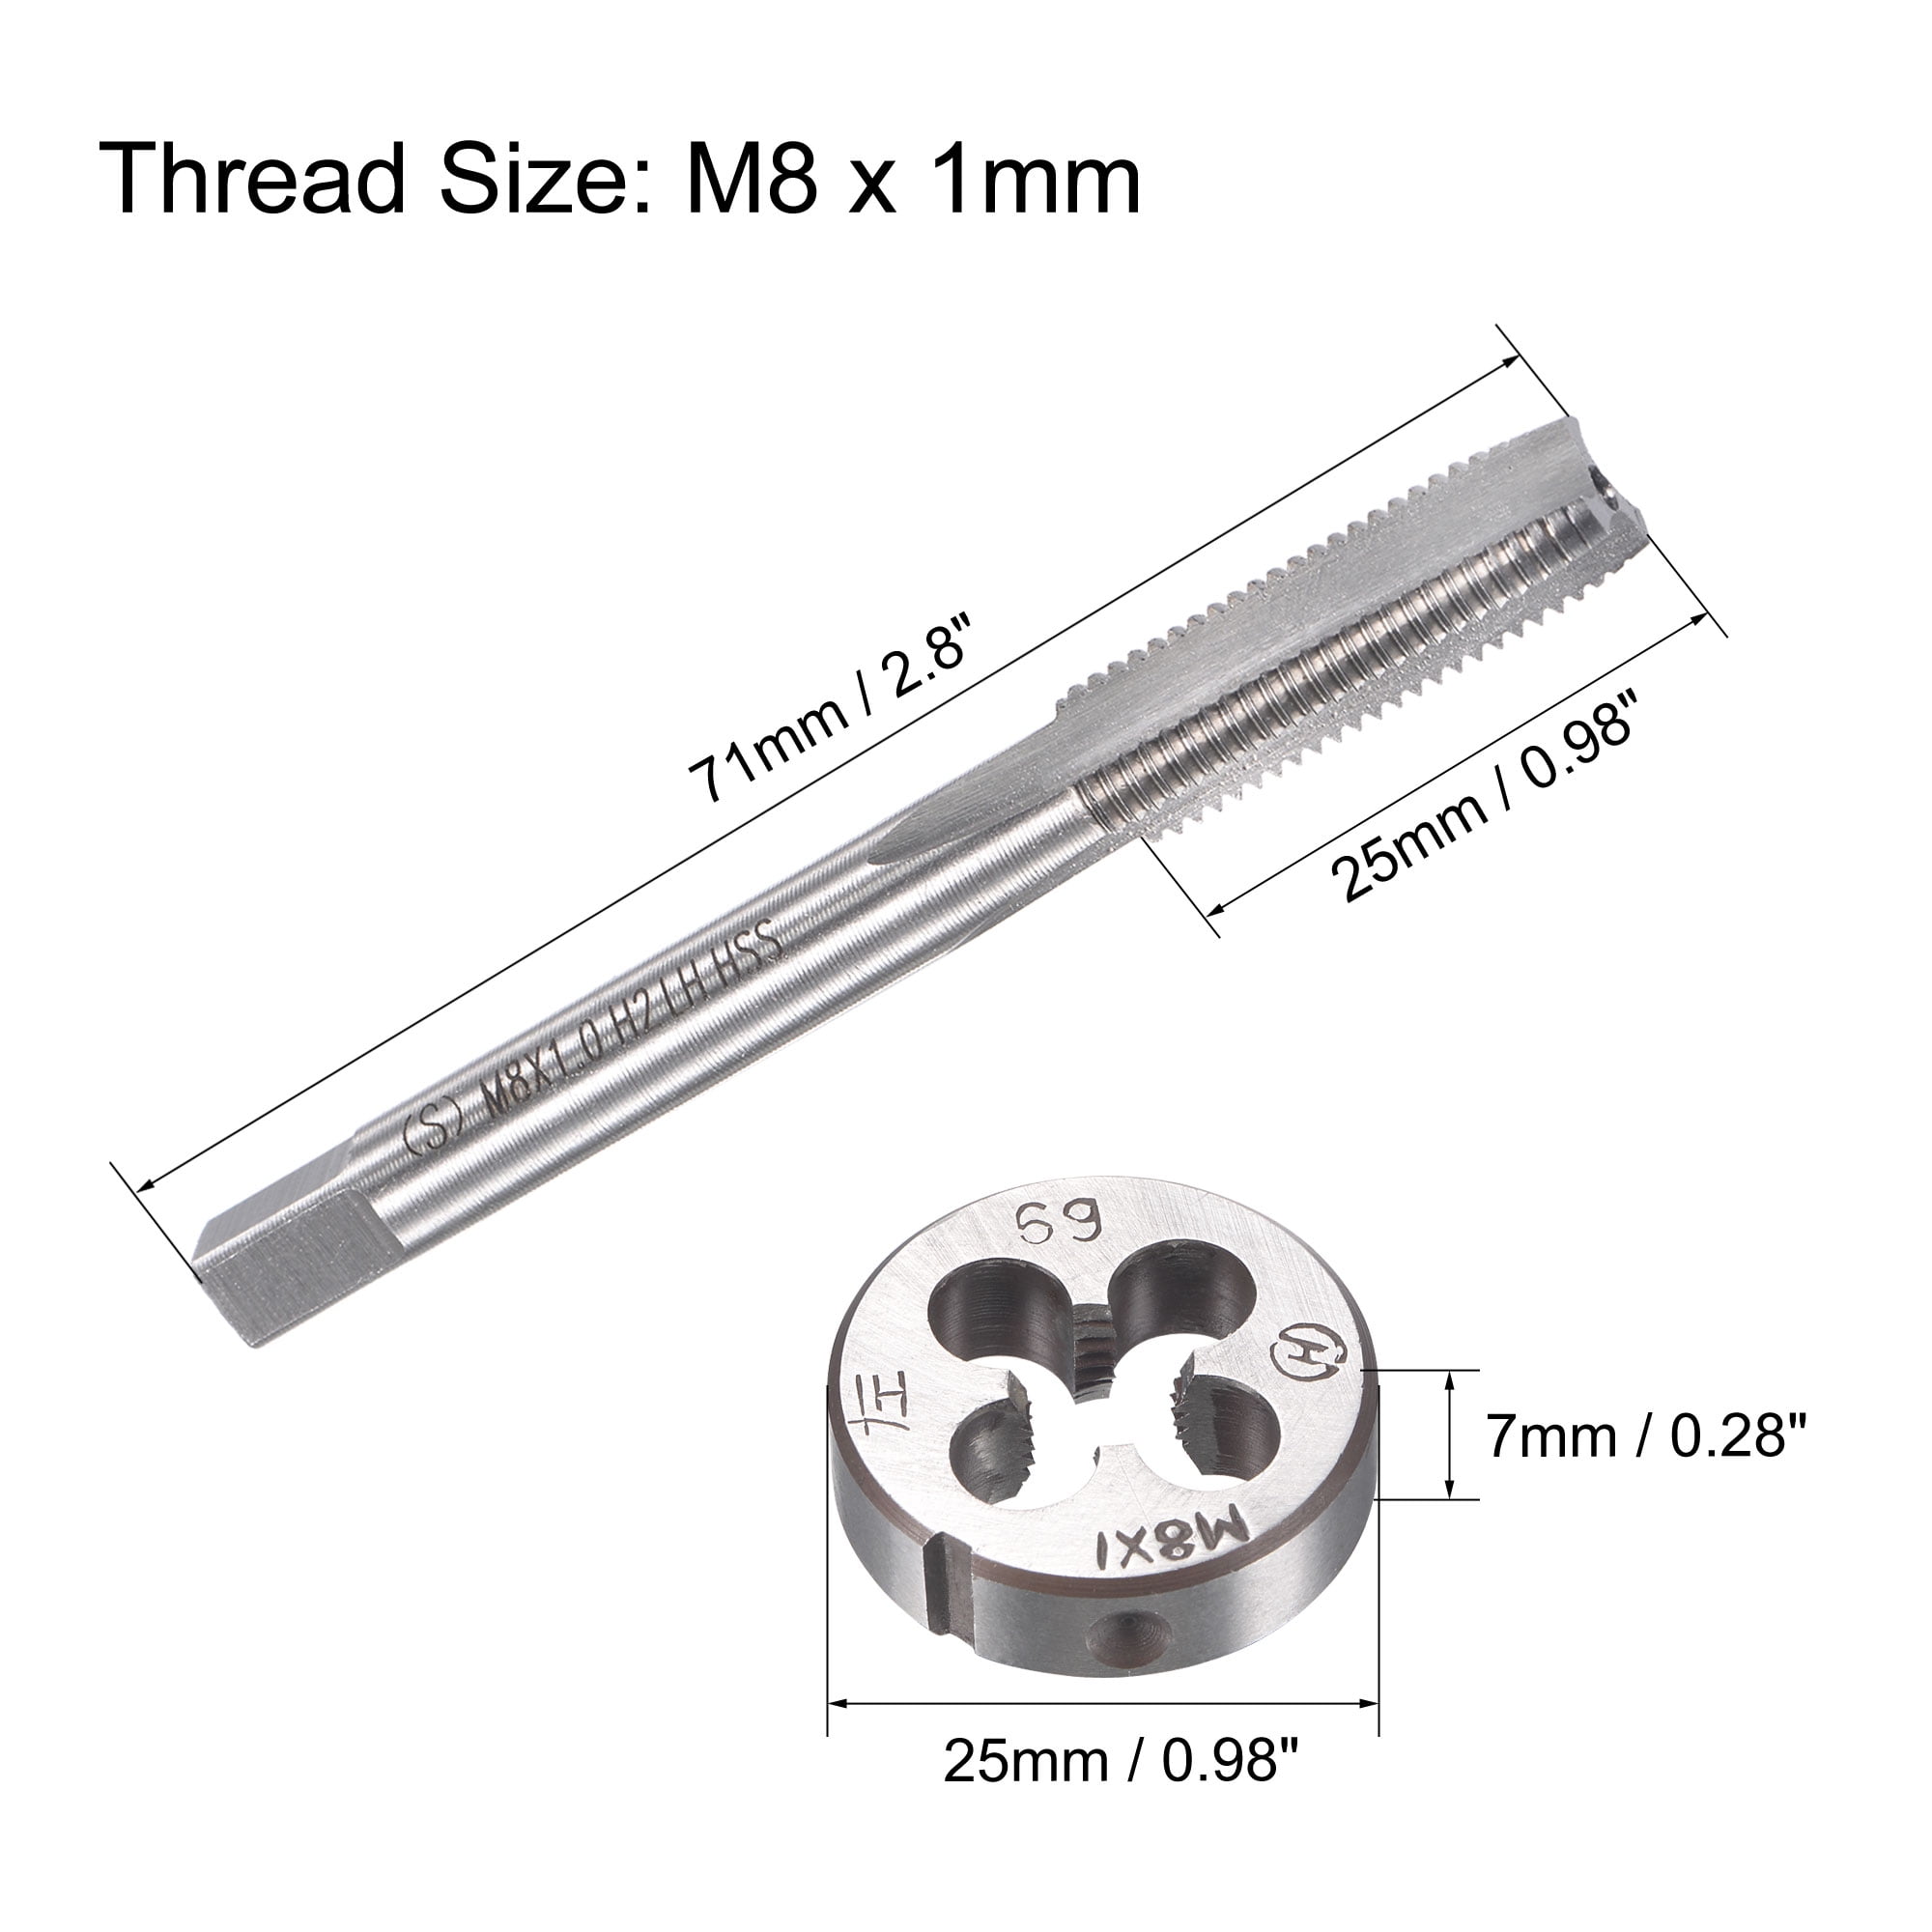 +-0.003,1/2 Length Magmate 1 Dia -.015,7.5 Lbs Tap Size,#10-24 Tap Depth,Cylindrical Magnet Assembly 